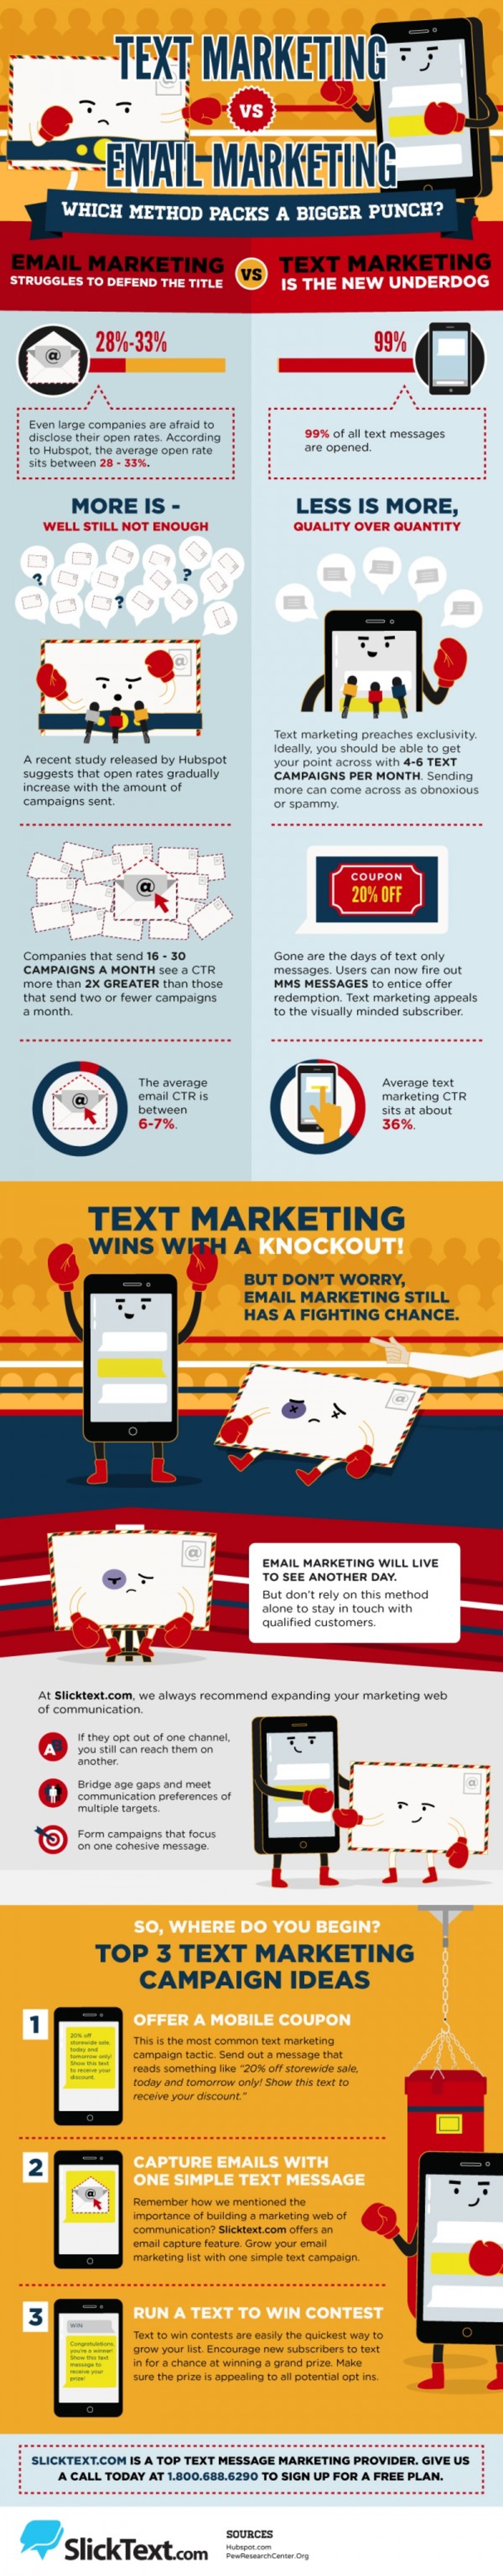 Text Marketing Vs. Email Marketing: Which One Packs a Bigger Punch? [Infographic] | Slick Text | The MarTech Digest | Scoop.it